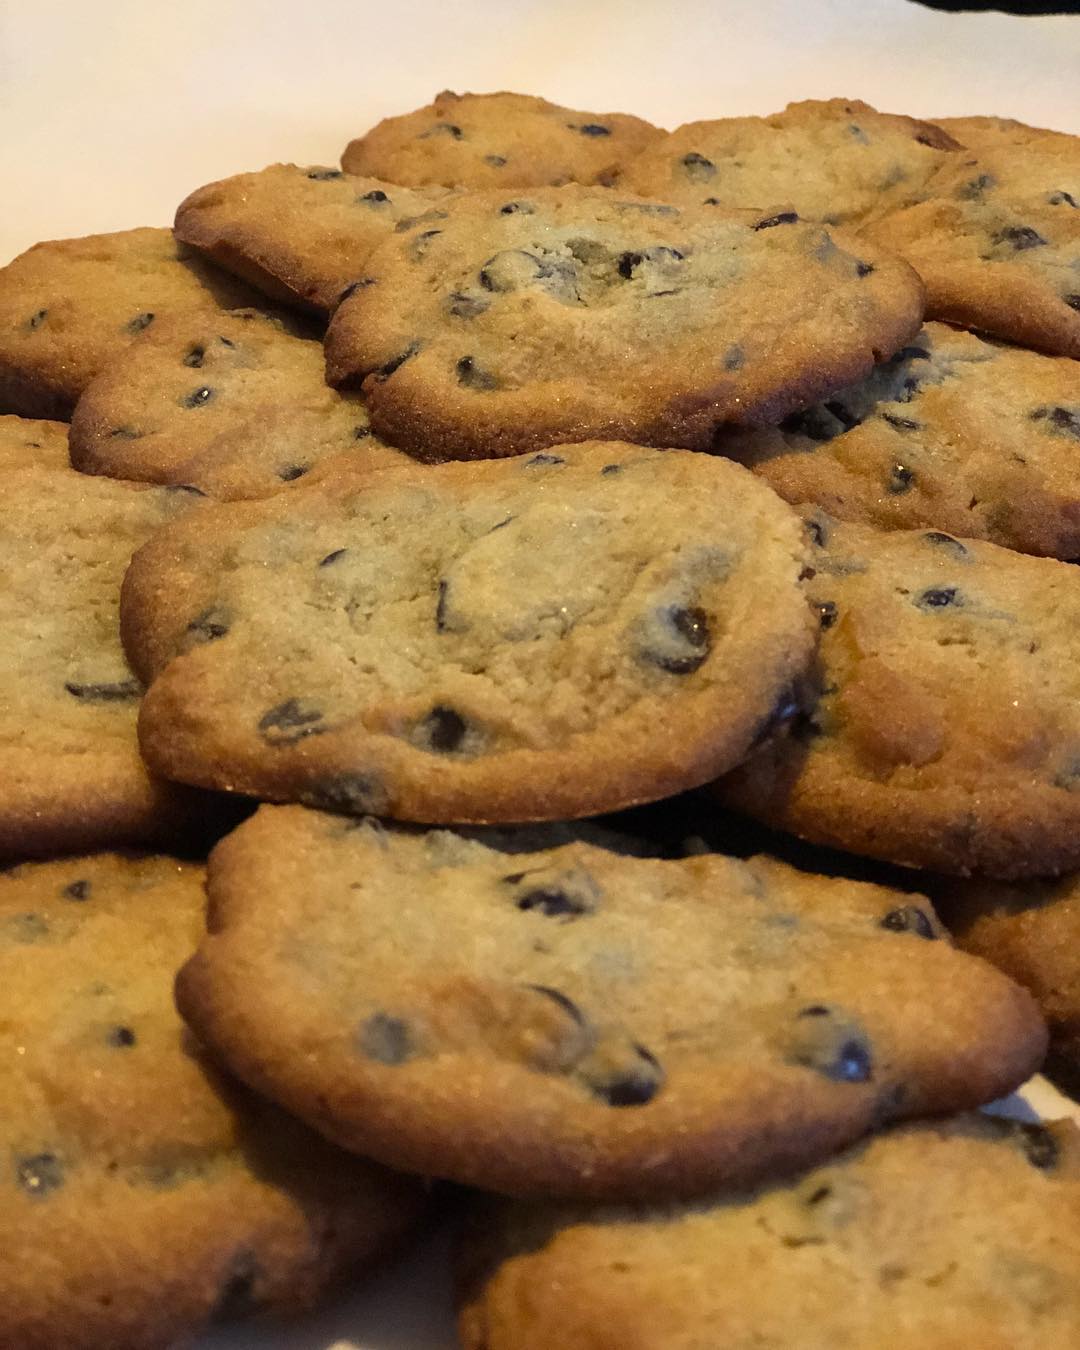 I just made these deliciously sweet keto chocolate chip cookies!
——
Ingredients
–
1/2 cup butter, softened
1/4 cup coconut oil
1 cup allulose (or other sweetener)
2 teaspoons vanilla extract
2 large eggs
1/2 teaspoon baking soda
1/2 teaspoon salt
3 cups blanched almond flour (see note below)
1 1/2 cups @lilys_sweets_chocolate chips
2/3 cup toasted walnuts (optional)
Instructions
—-
Preheat oven to 350 degrees. Line a baking sheet with parchment paper.
Using a mixer, cream together the butter, coconut oil, and -sweetener. Add the vanilla & eggs, mixing completely.
Mix in the baking soda & salt then add the almond flour, 1 cup at a time, mixing well! Stir in the chocolate chips and walnuts if desired with a wooden spoon.
Spoon tablespoons of the dough approximately 3 inches apart on to the cookie sheet. Bake for 11-13 minutes, or until golden brown around edges and then let cool. Enjoy